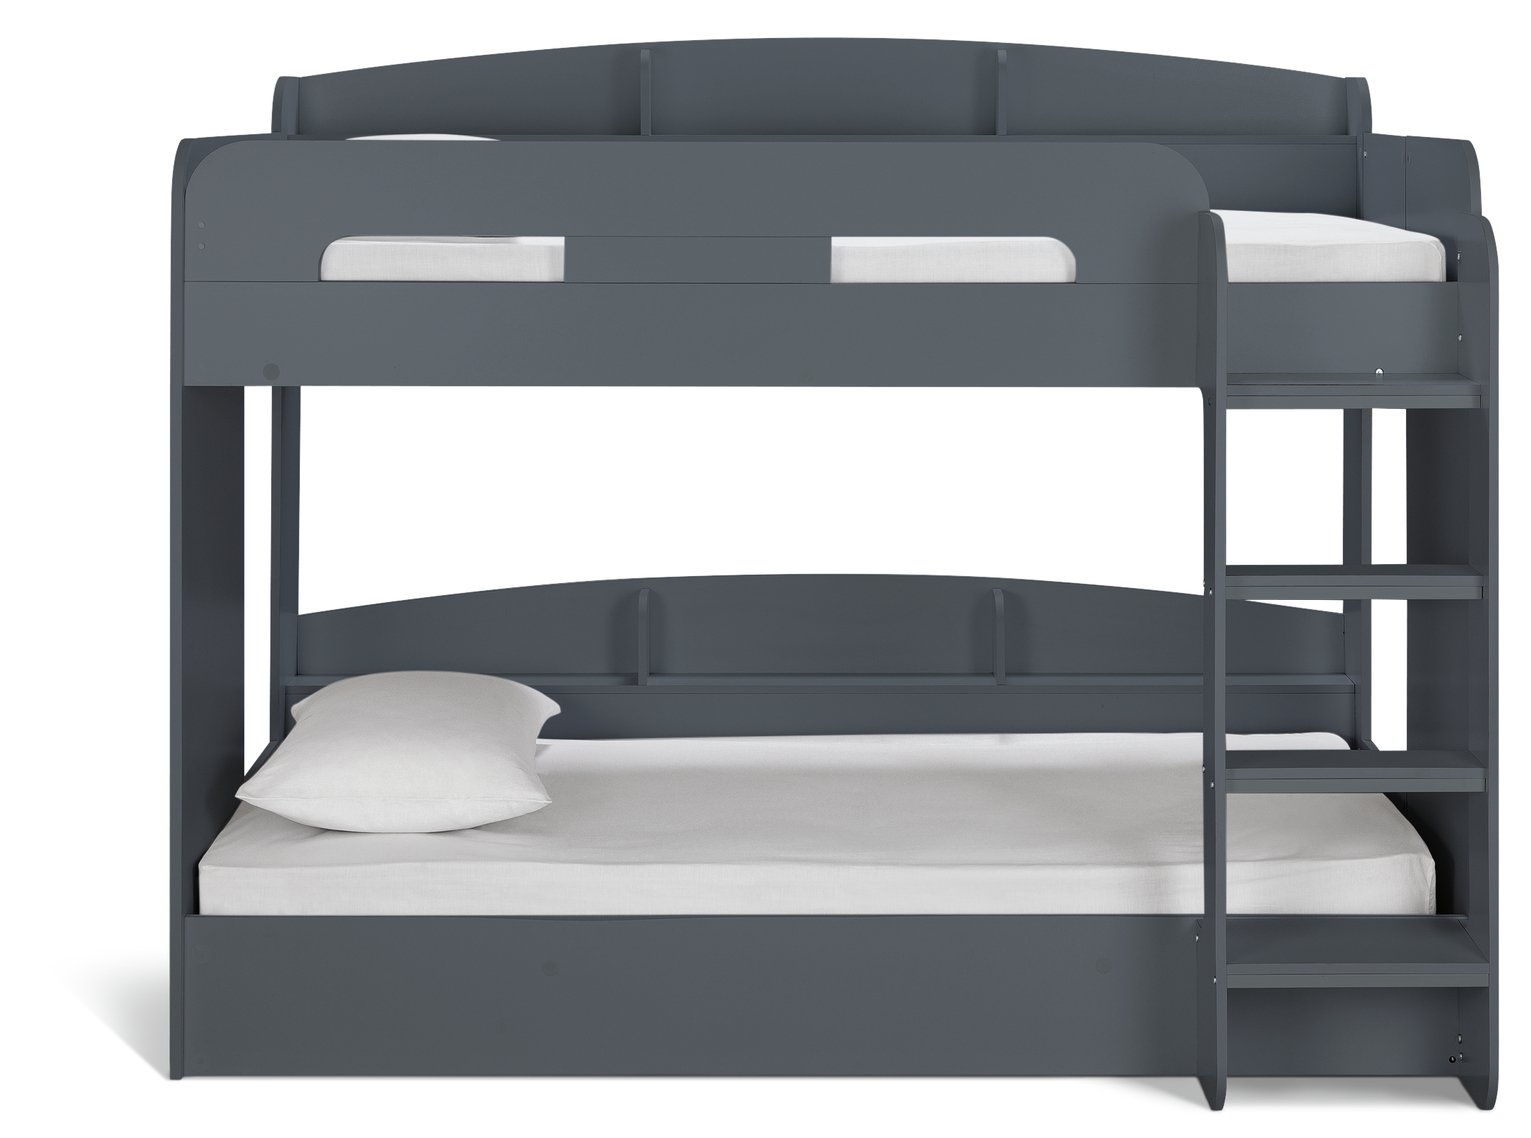 Argos Home Ultimate Bunk Bed With Mattresses Review